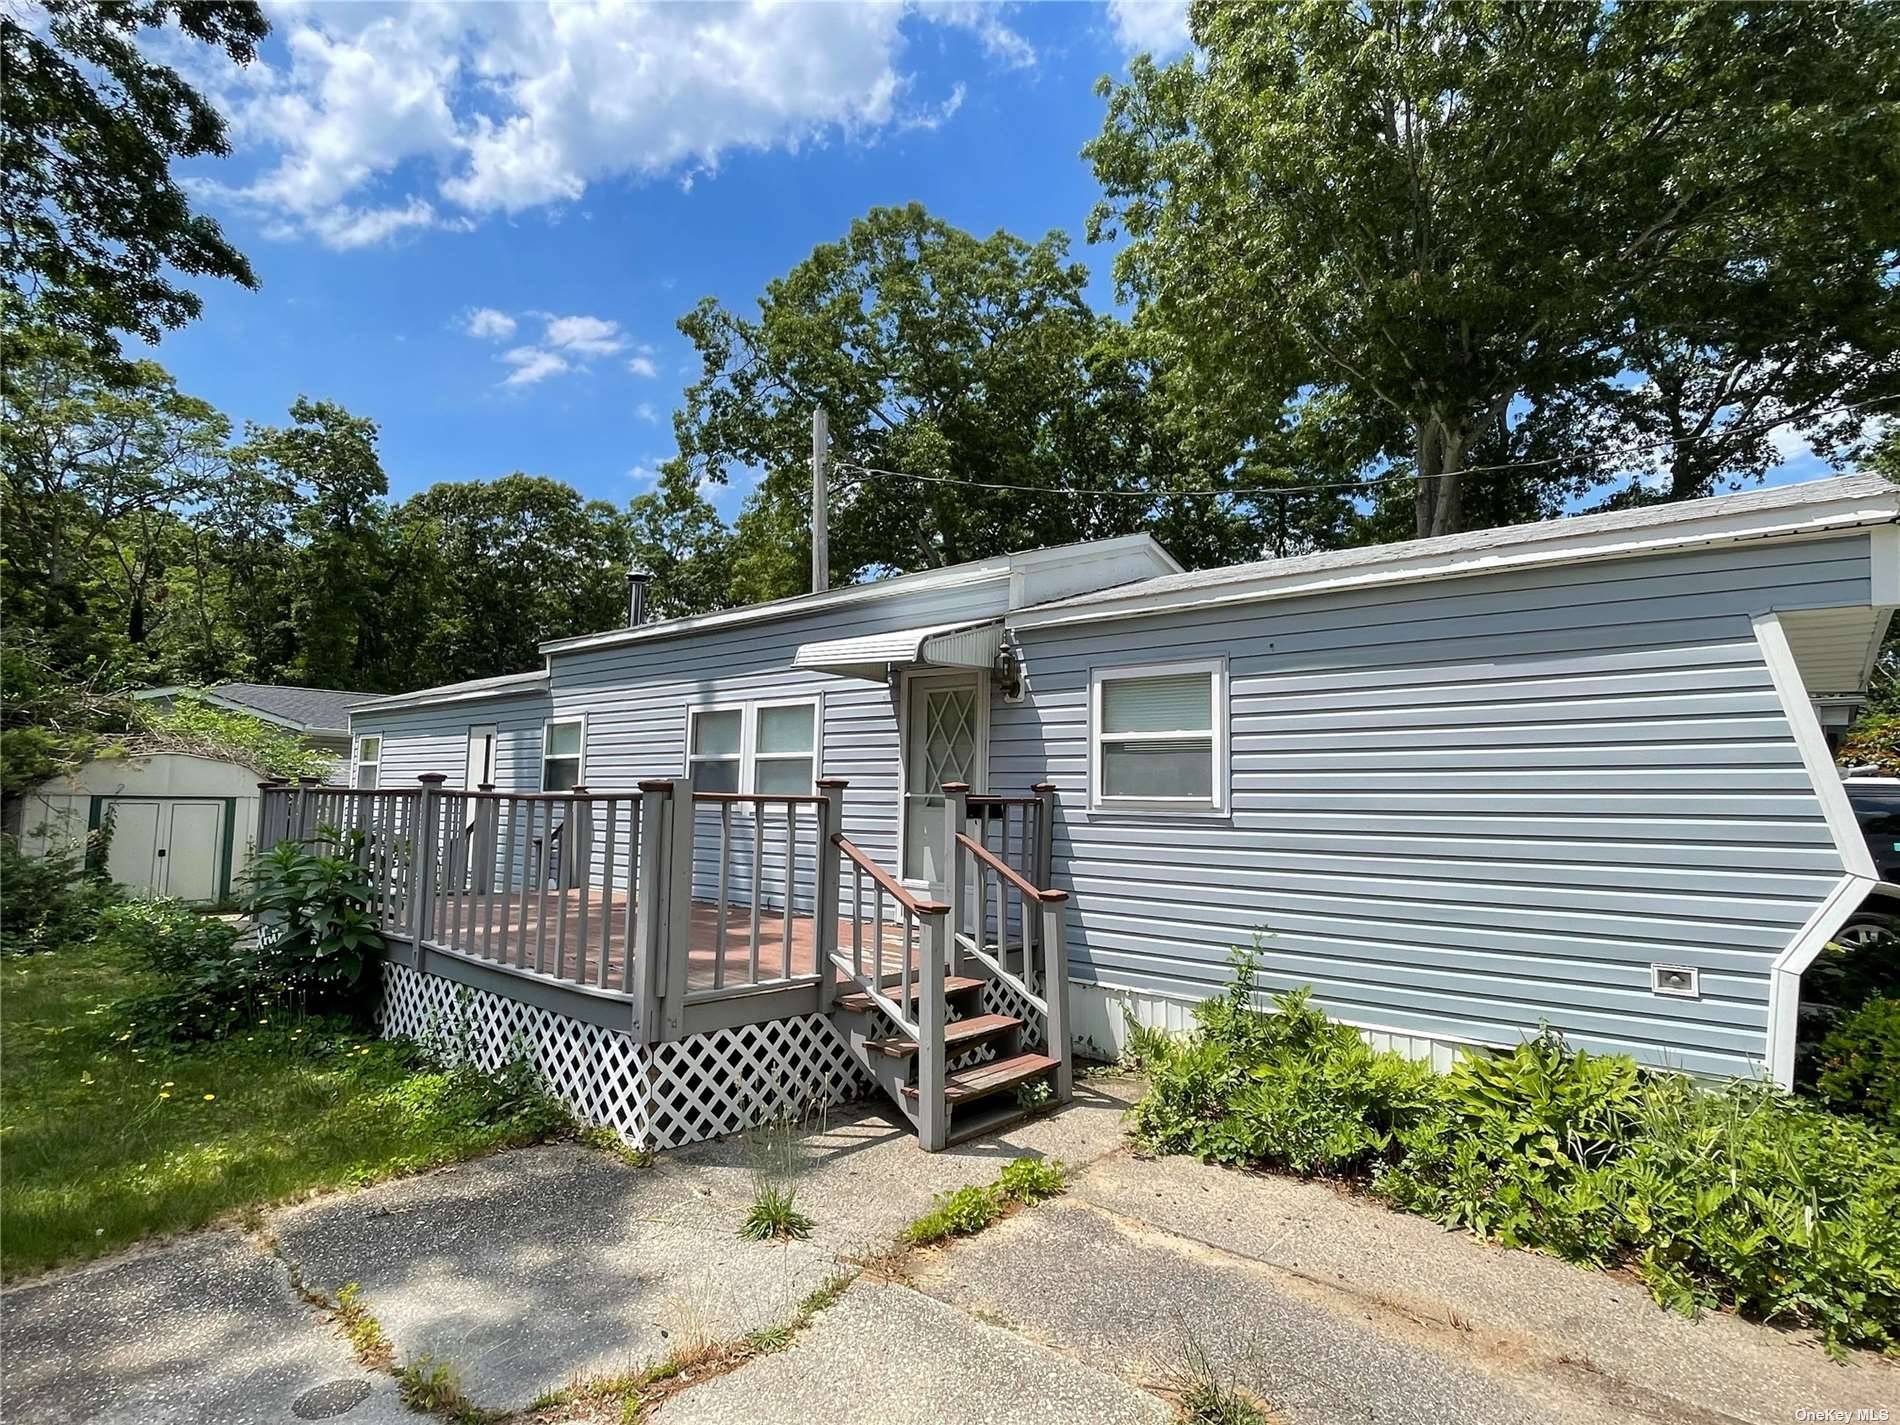 CASH DEAL, 55 community in lovely Wading River !